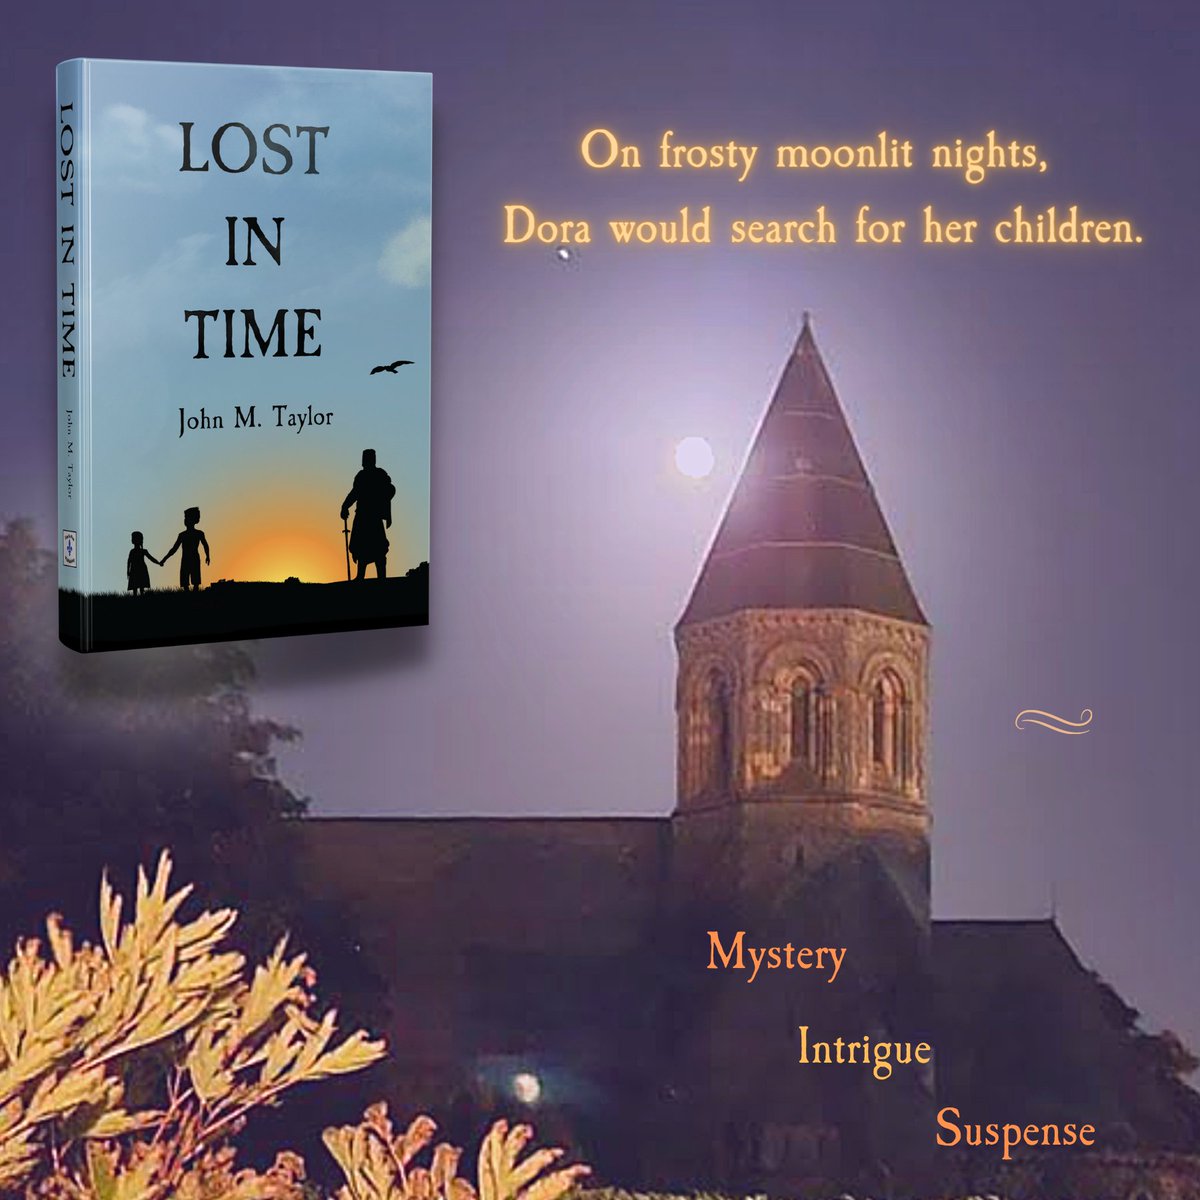 When her children disappear without a trace, their mother will never stop looking. mybook.to/9hbWozG